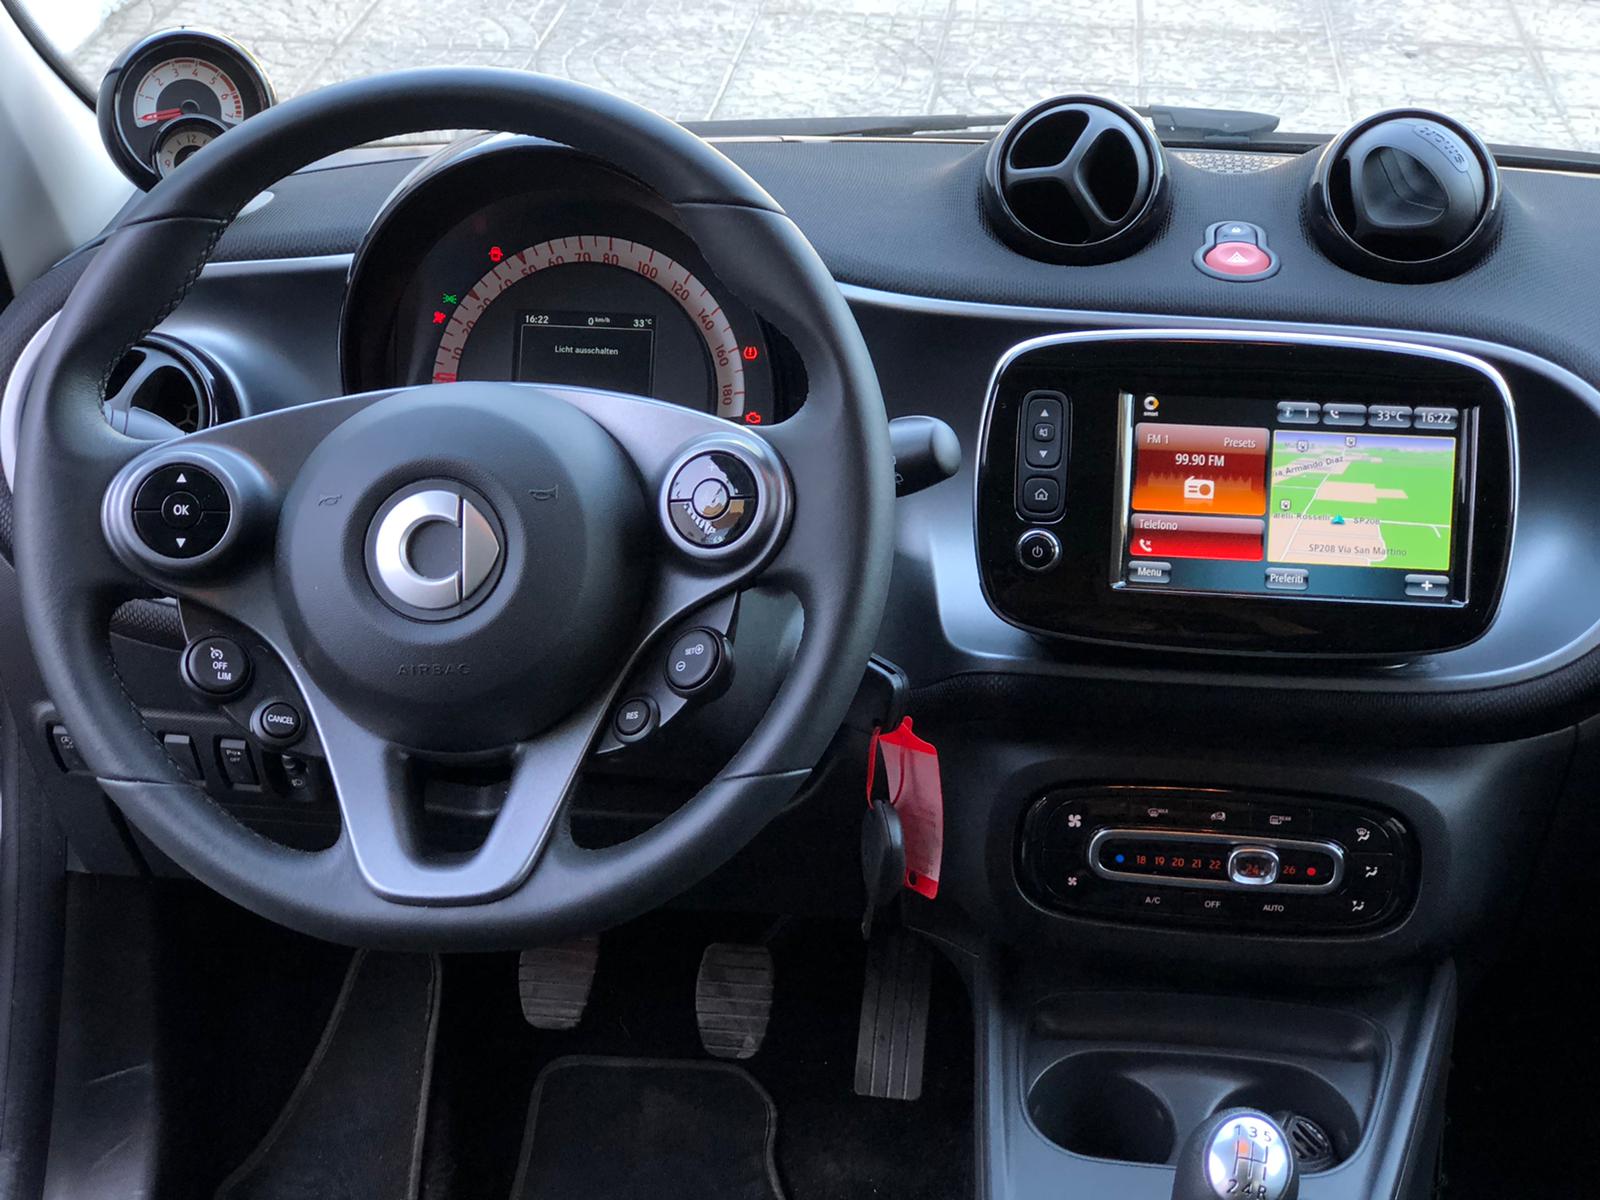 Smart forFour 1.0 Passion Edition *Full Led*Navi*Pano – AlbaCar Group